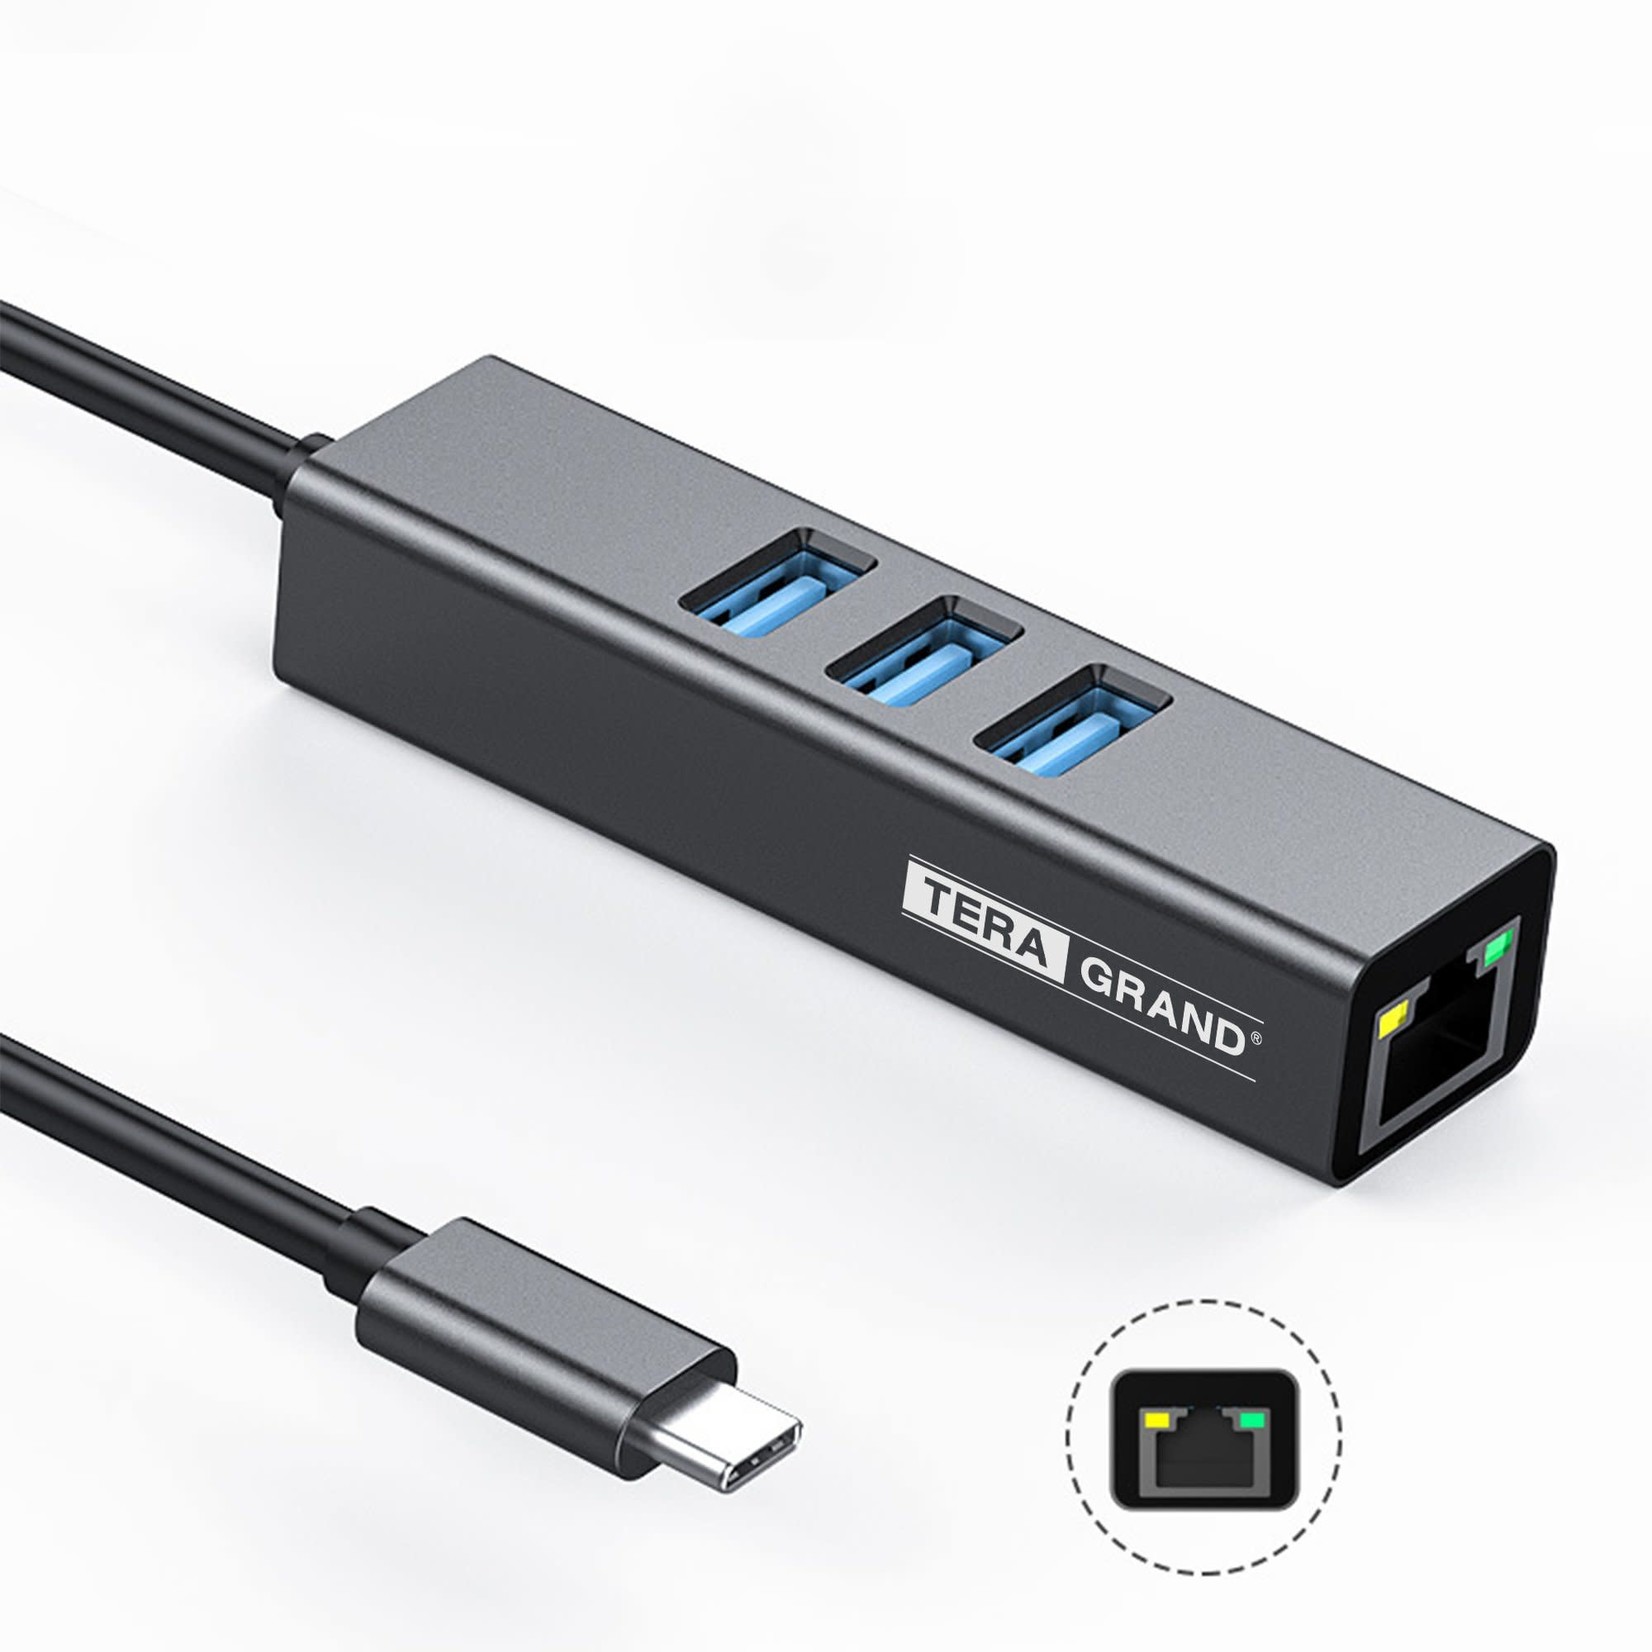 Tera Grand USB-C to Gigabit Ethernet Adapter with USB Ports